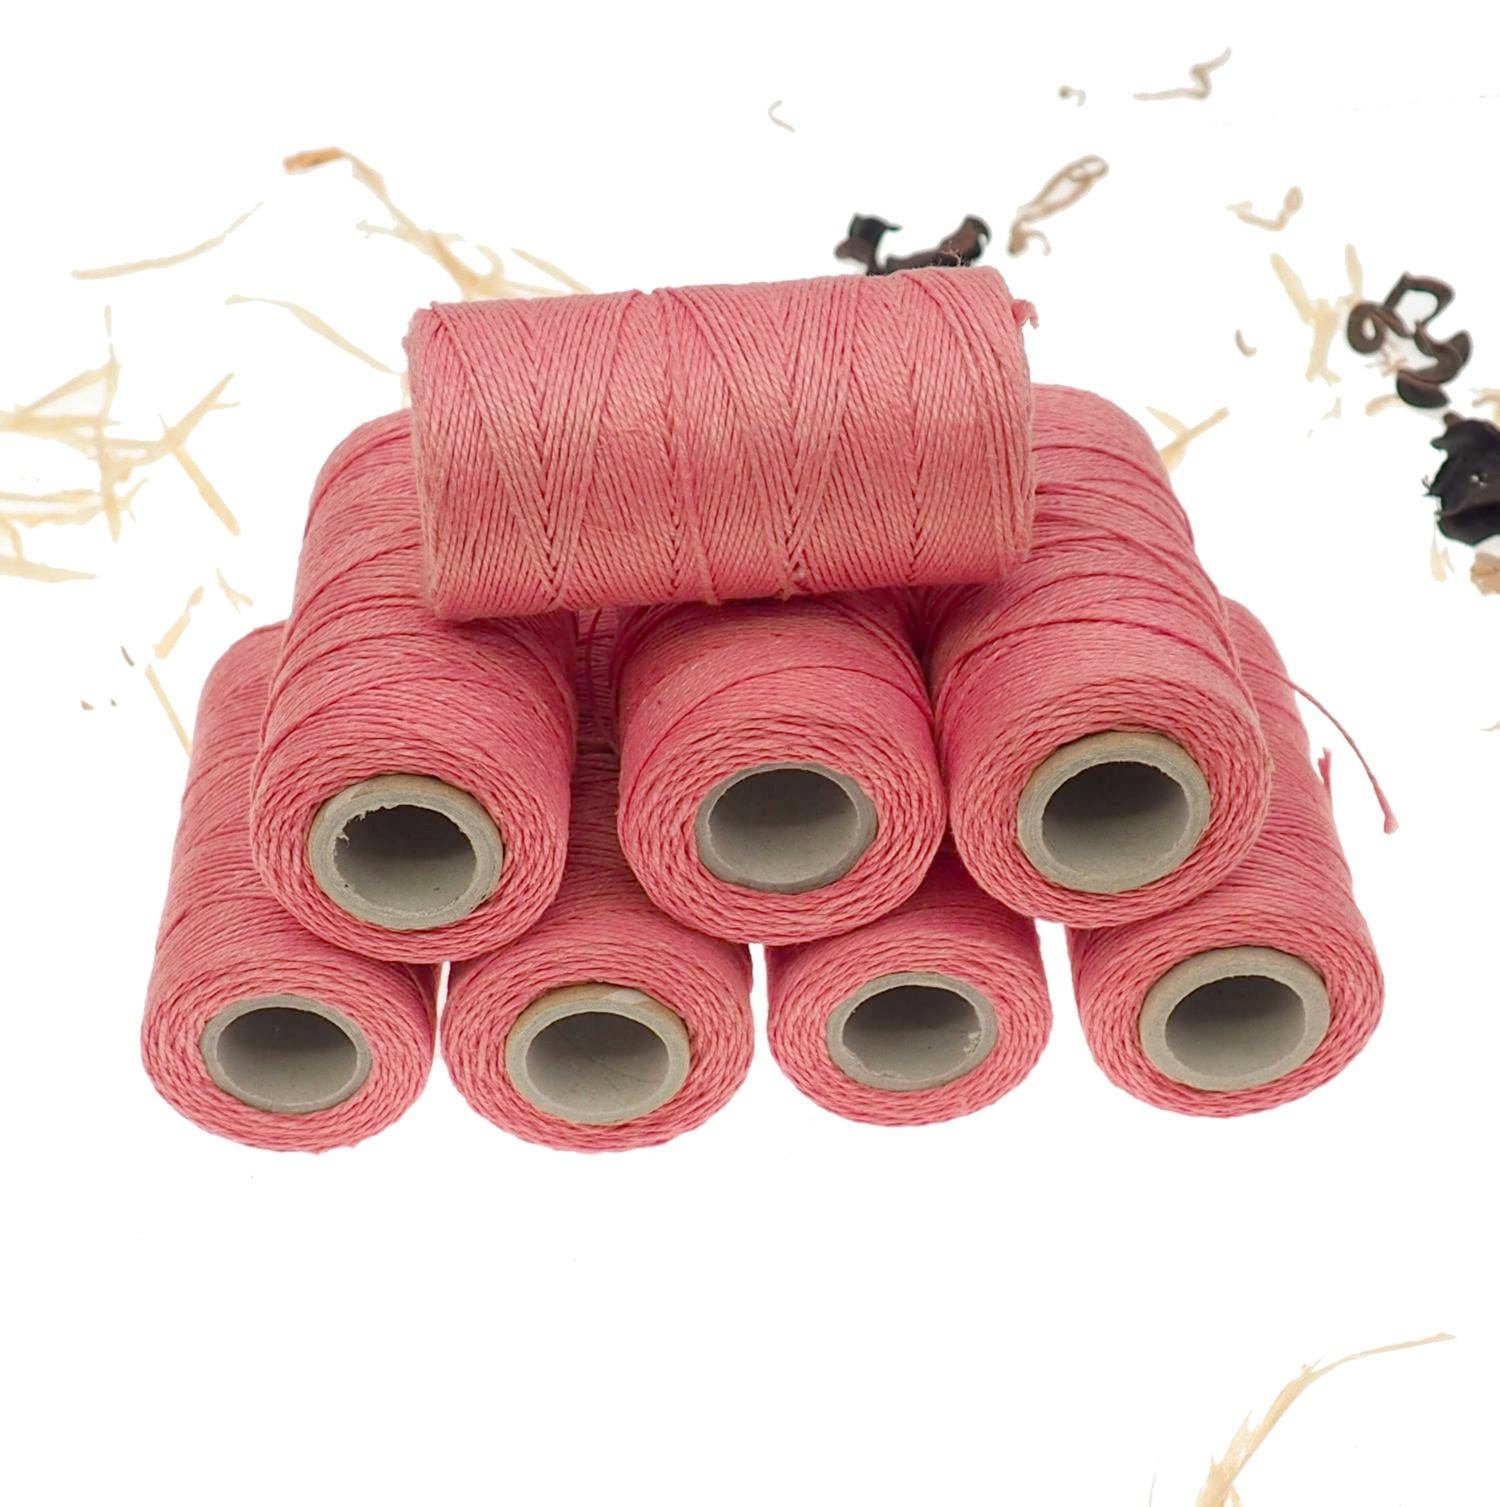 RED Linen Thread, Unwaxed Red Linen String , Warp Thread Thickness of 1mm /  3ply 100grams 210 Yards 190 Metres, Linen Sewing Thread 